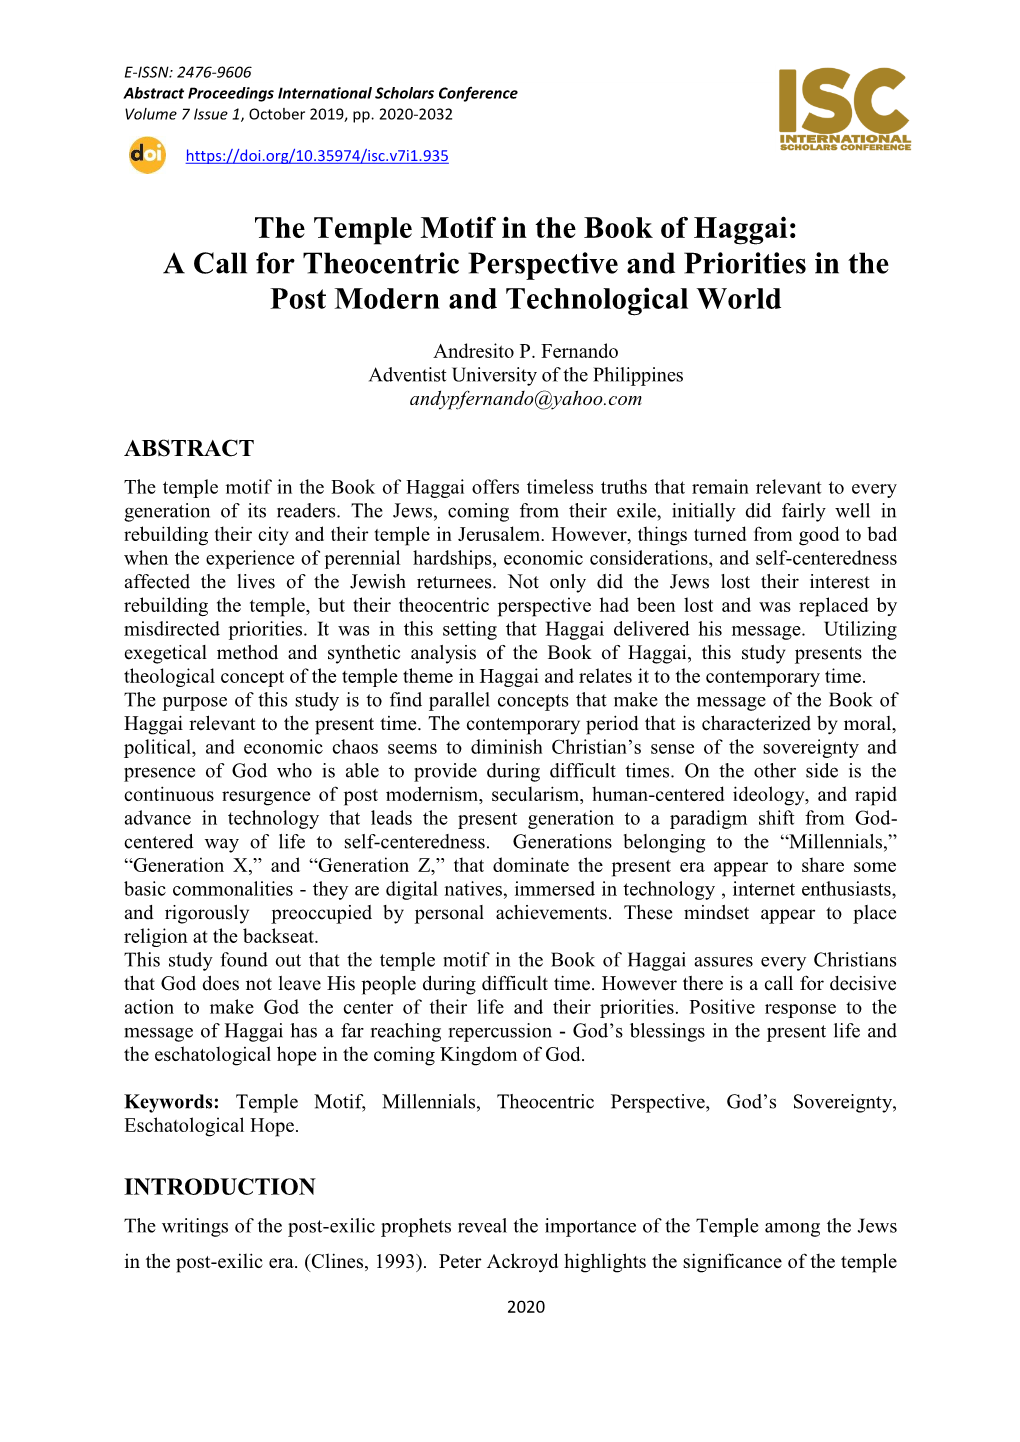 The Temple Motif in the Book of Haggai: a Call for Theocentric Perspective and Priorities in the Post Modern and Technological World